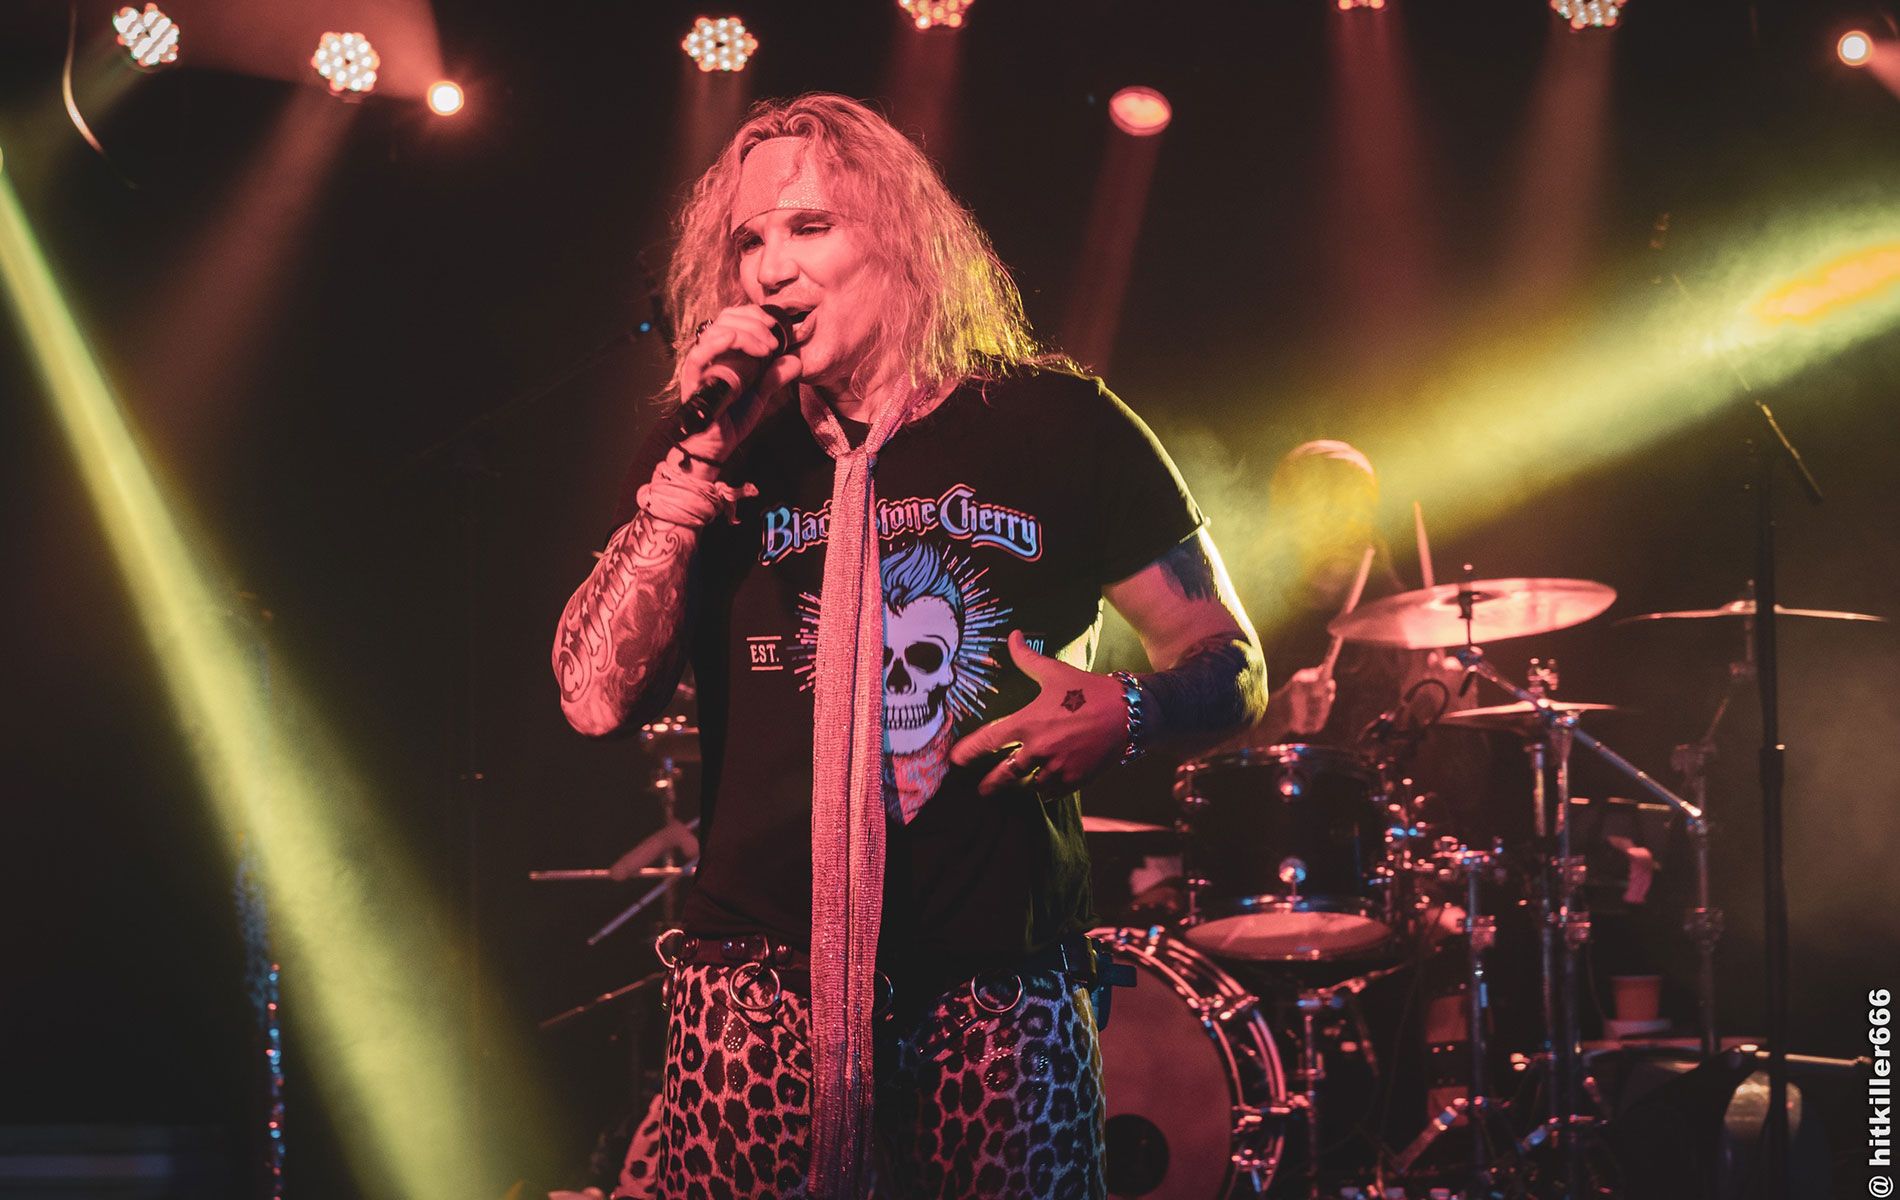 Steel-Panther-L-A-Maybe-Shakal-Today-0049.jpg